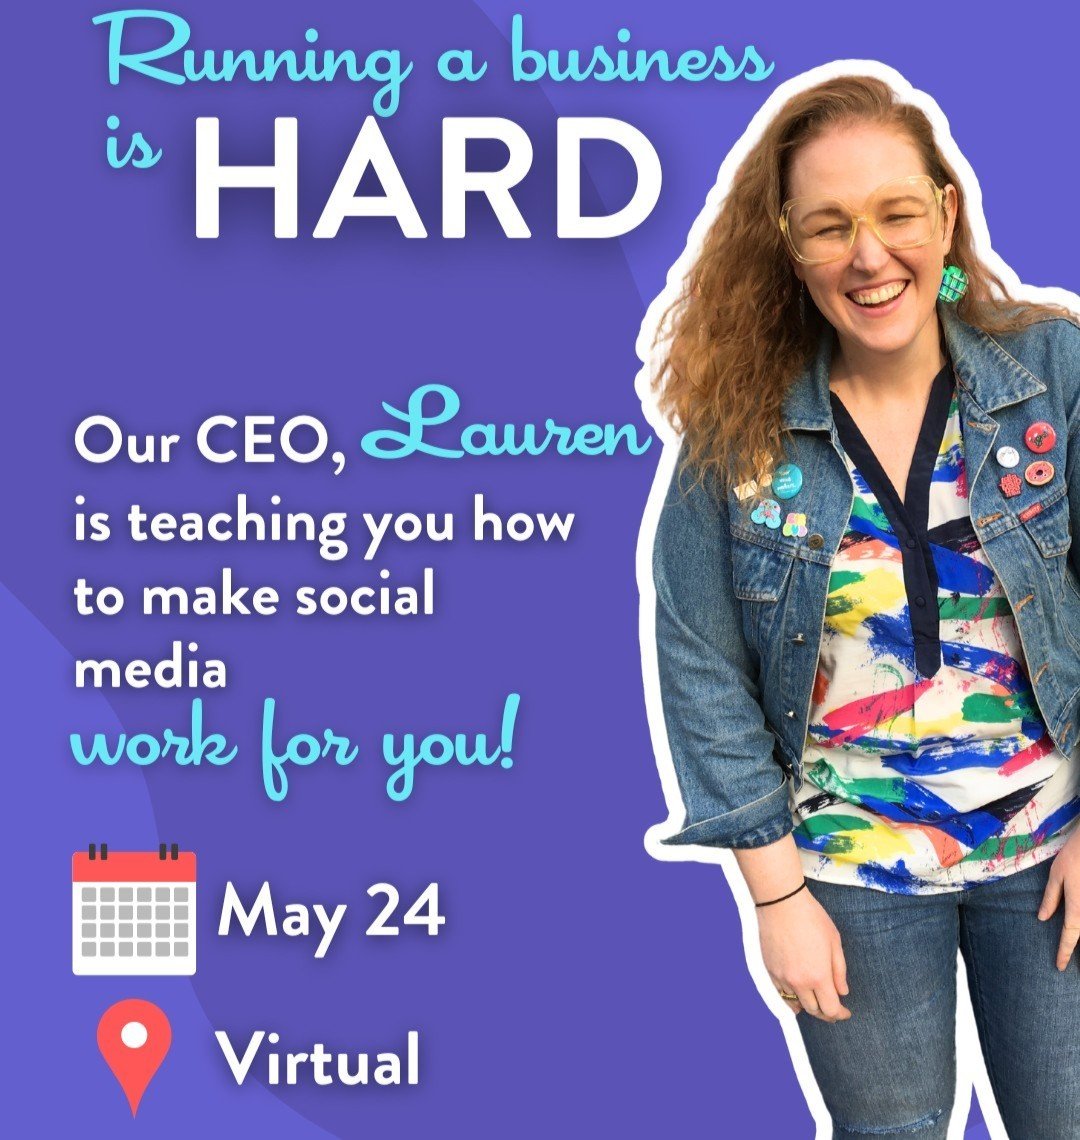 NEWSFLASH: Social Media Strategy doesn't have to be complicated. In fact, it SHOULDN'T be complicated. 
But it CAN feel overwhelming. 

Let Lauren show you the light and make things easy. Lauren will be hosting a webinar to discuss creating a social 